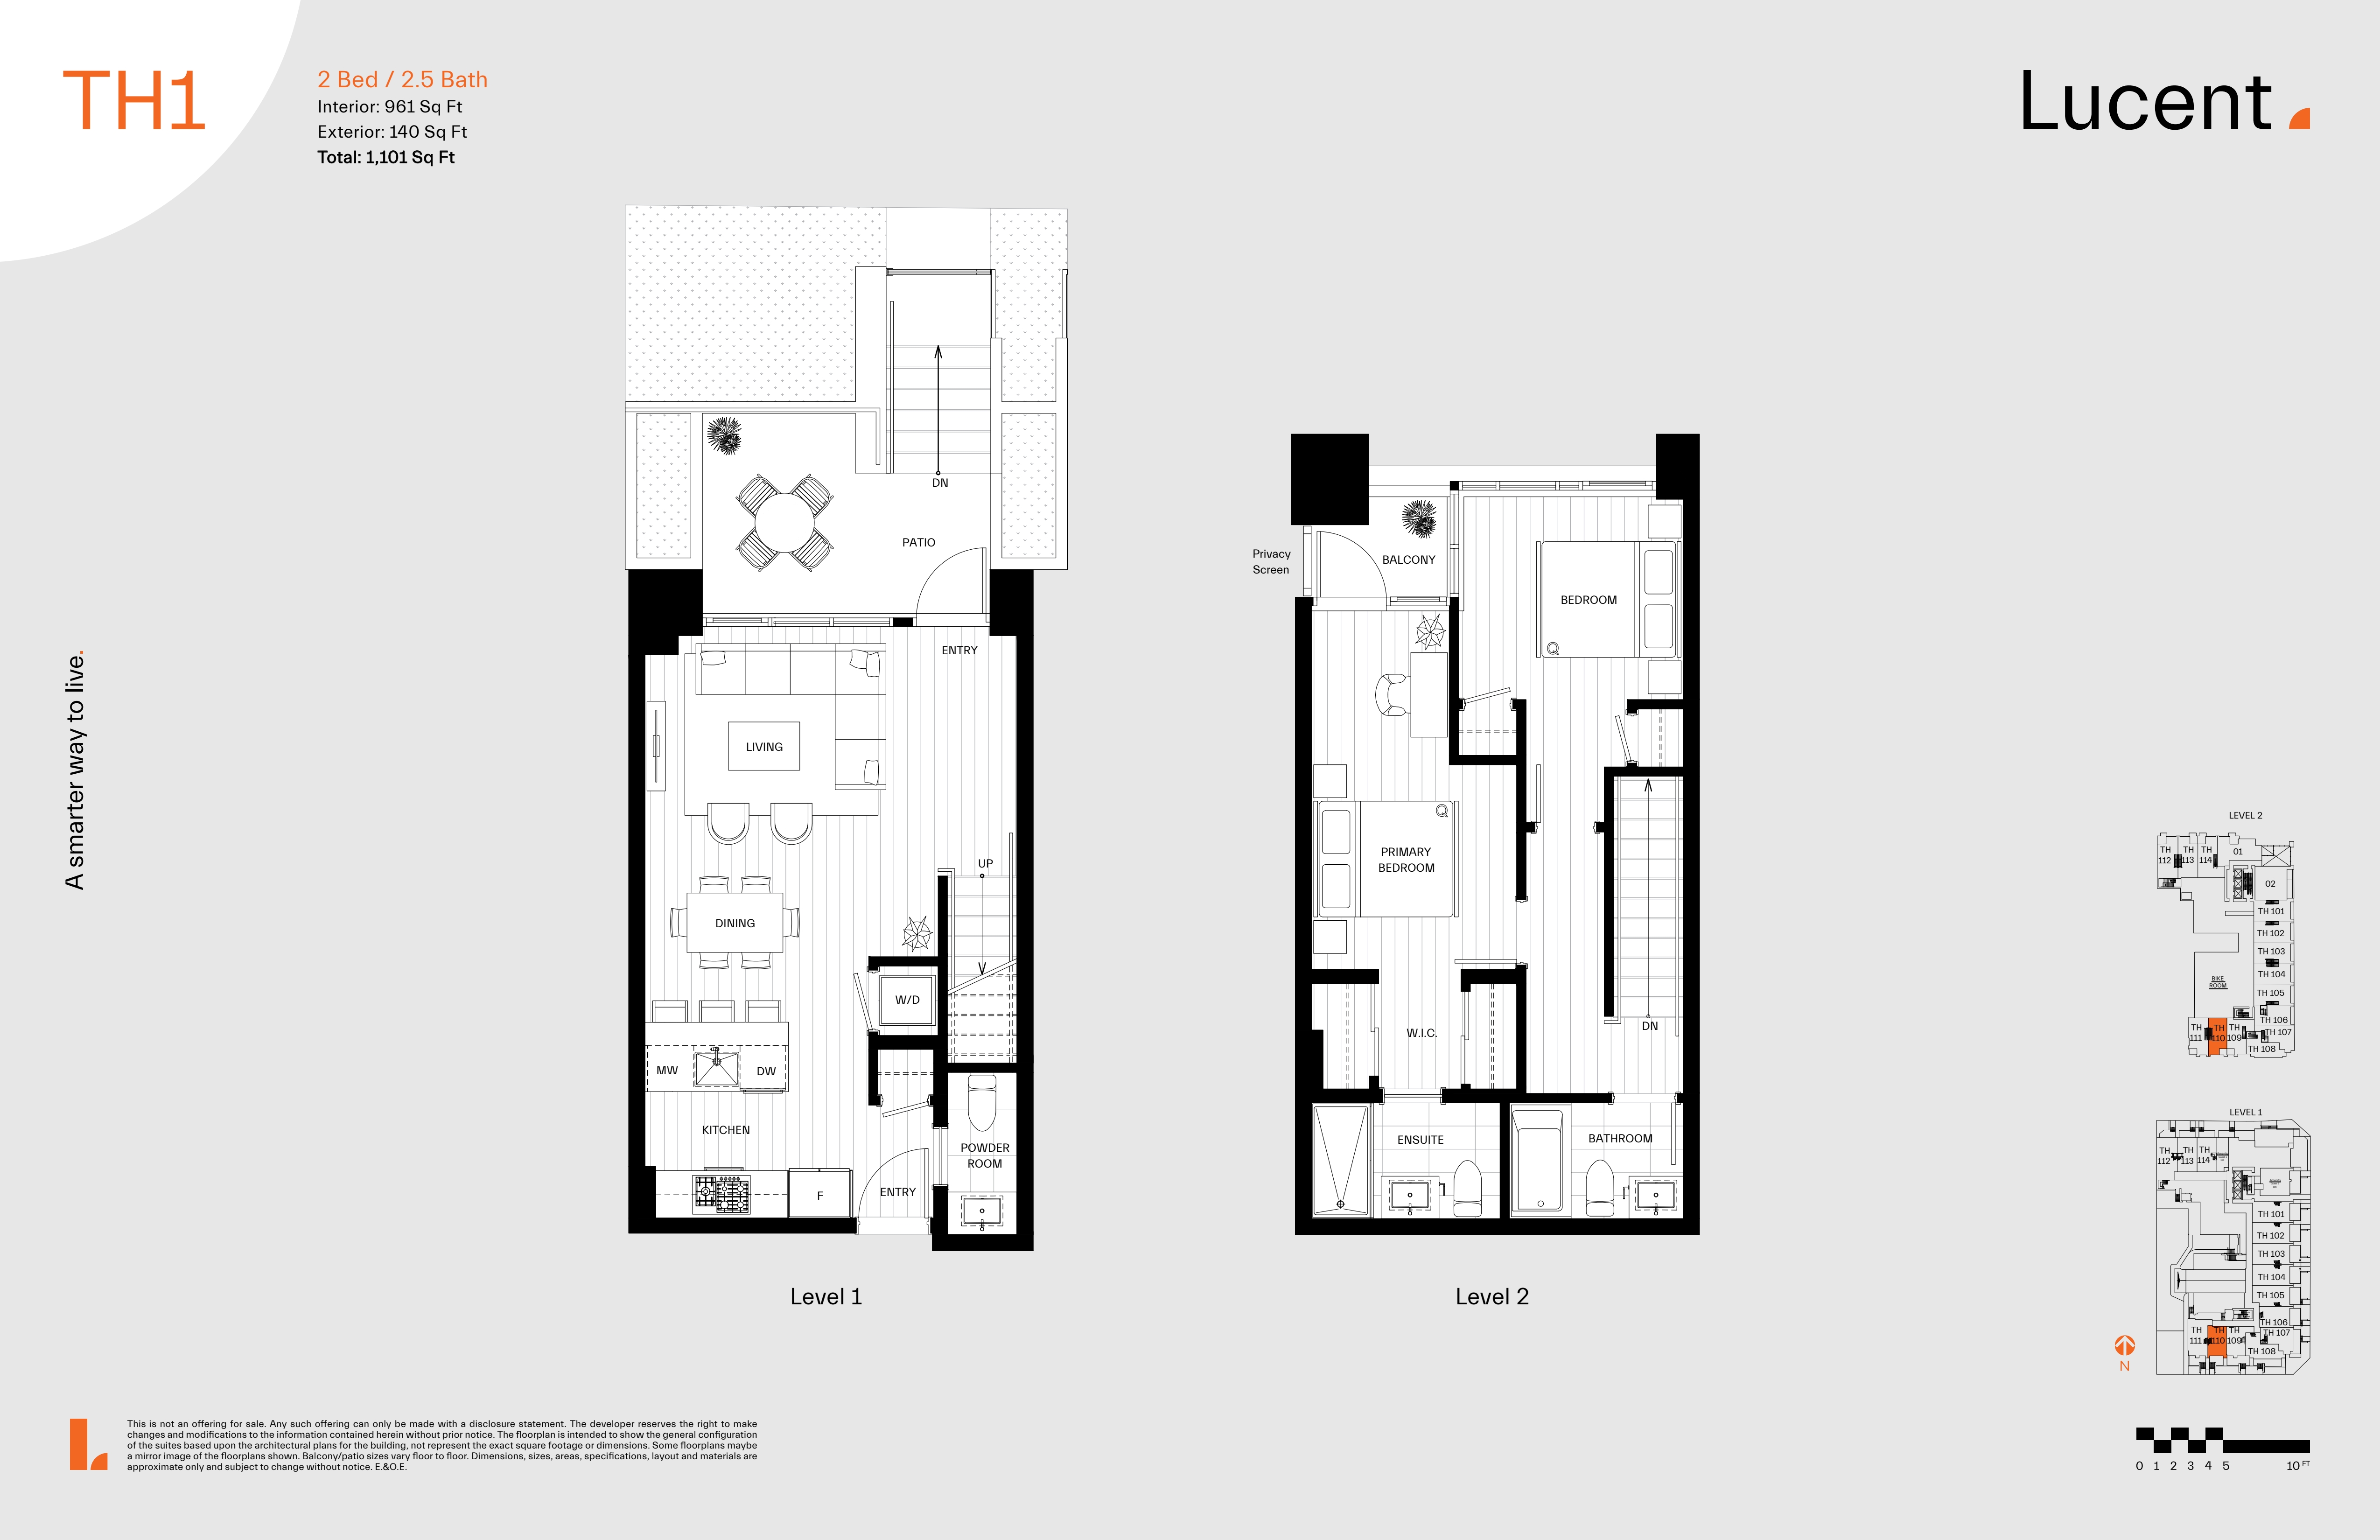  TH 1  Floor Plan of Lucent Condos with undefined beds